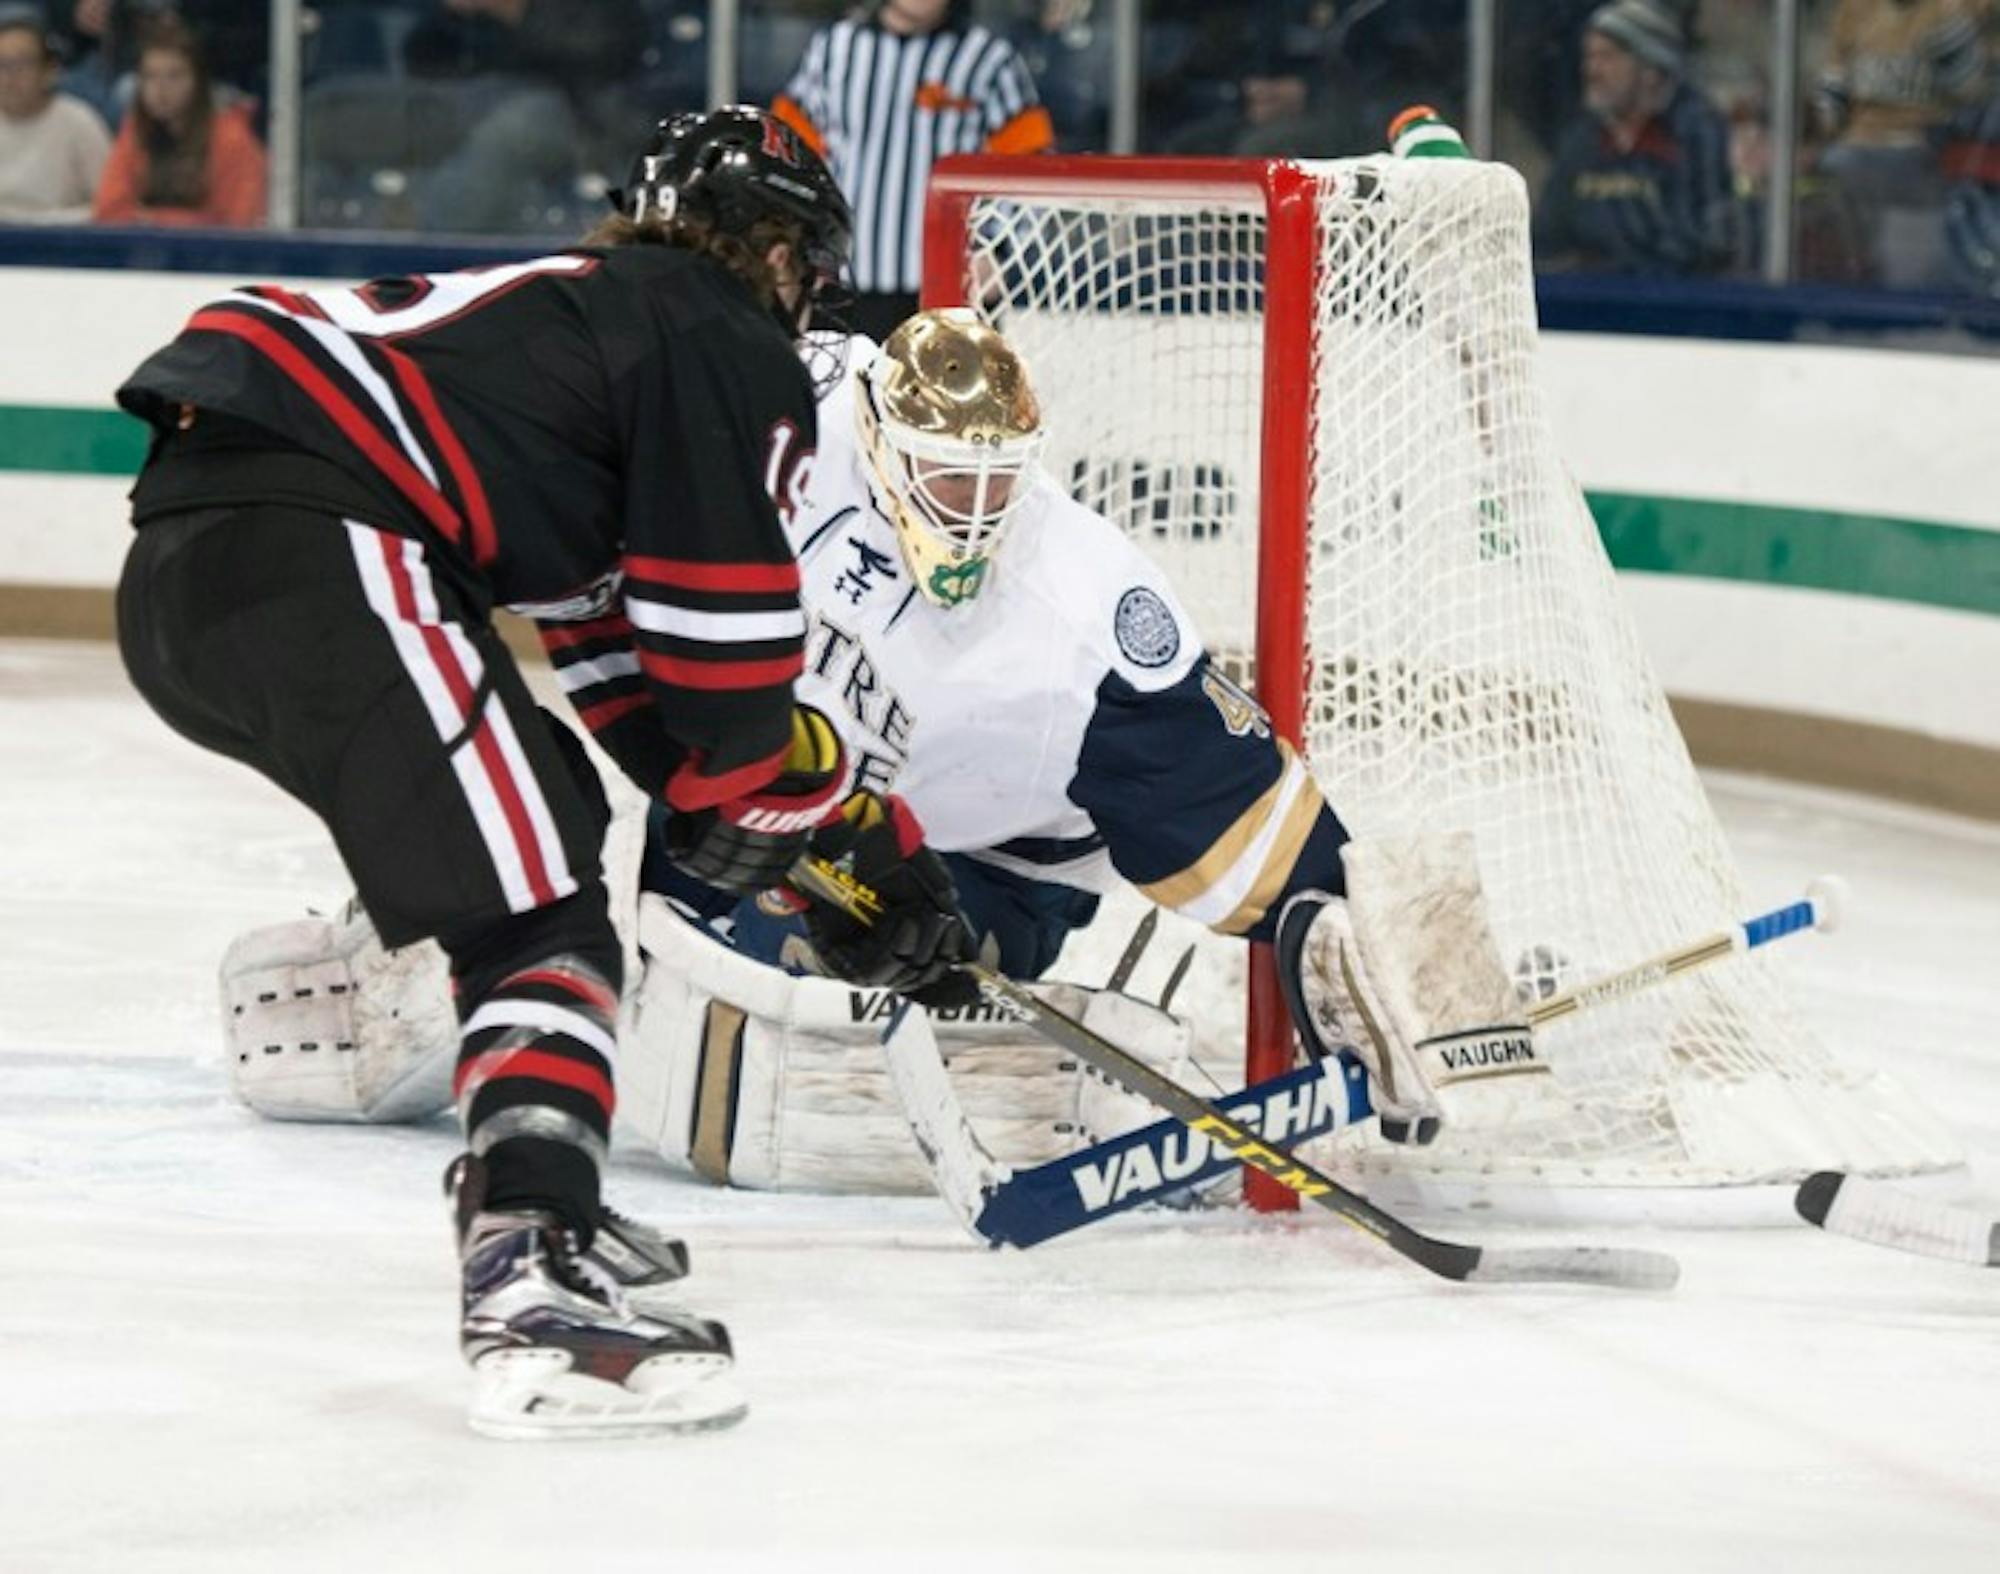 Irish sophomore goaltender Cal Petersen blocks a shot during Notre Dame’s 3-2 victory over Northeastern on Thursday night at Compton Family Ice Arena. Peterson recorded 23 saves during the game.